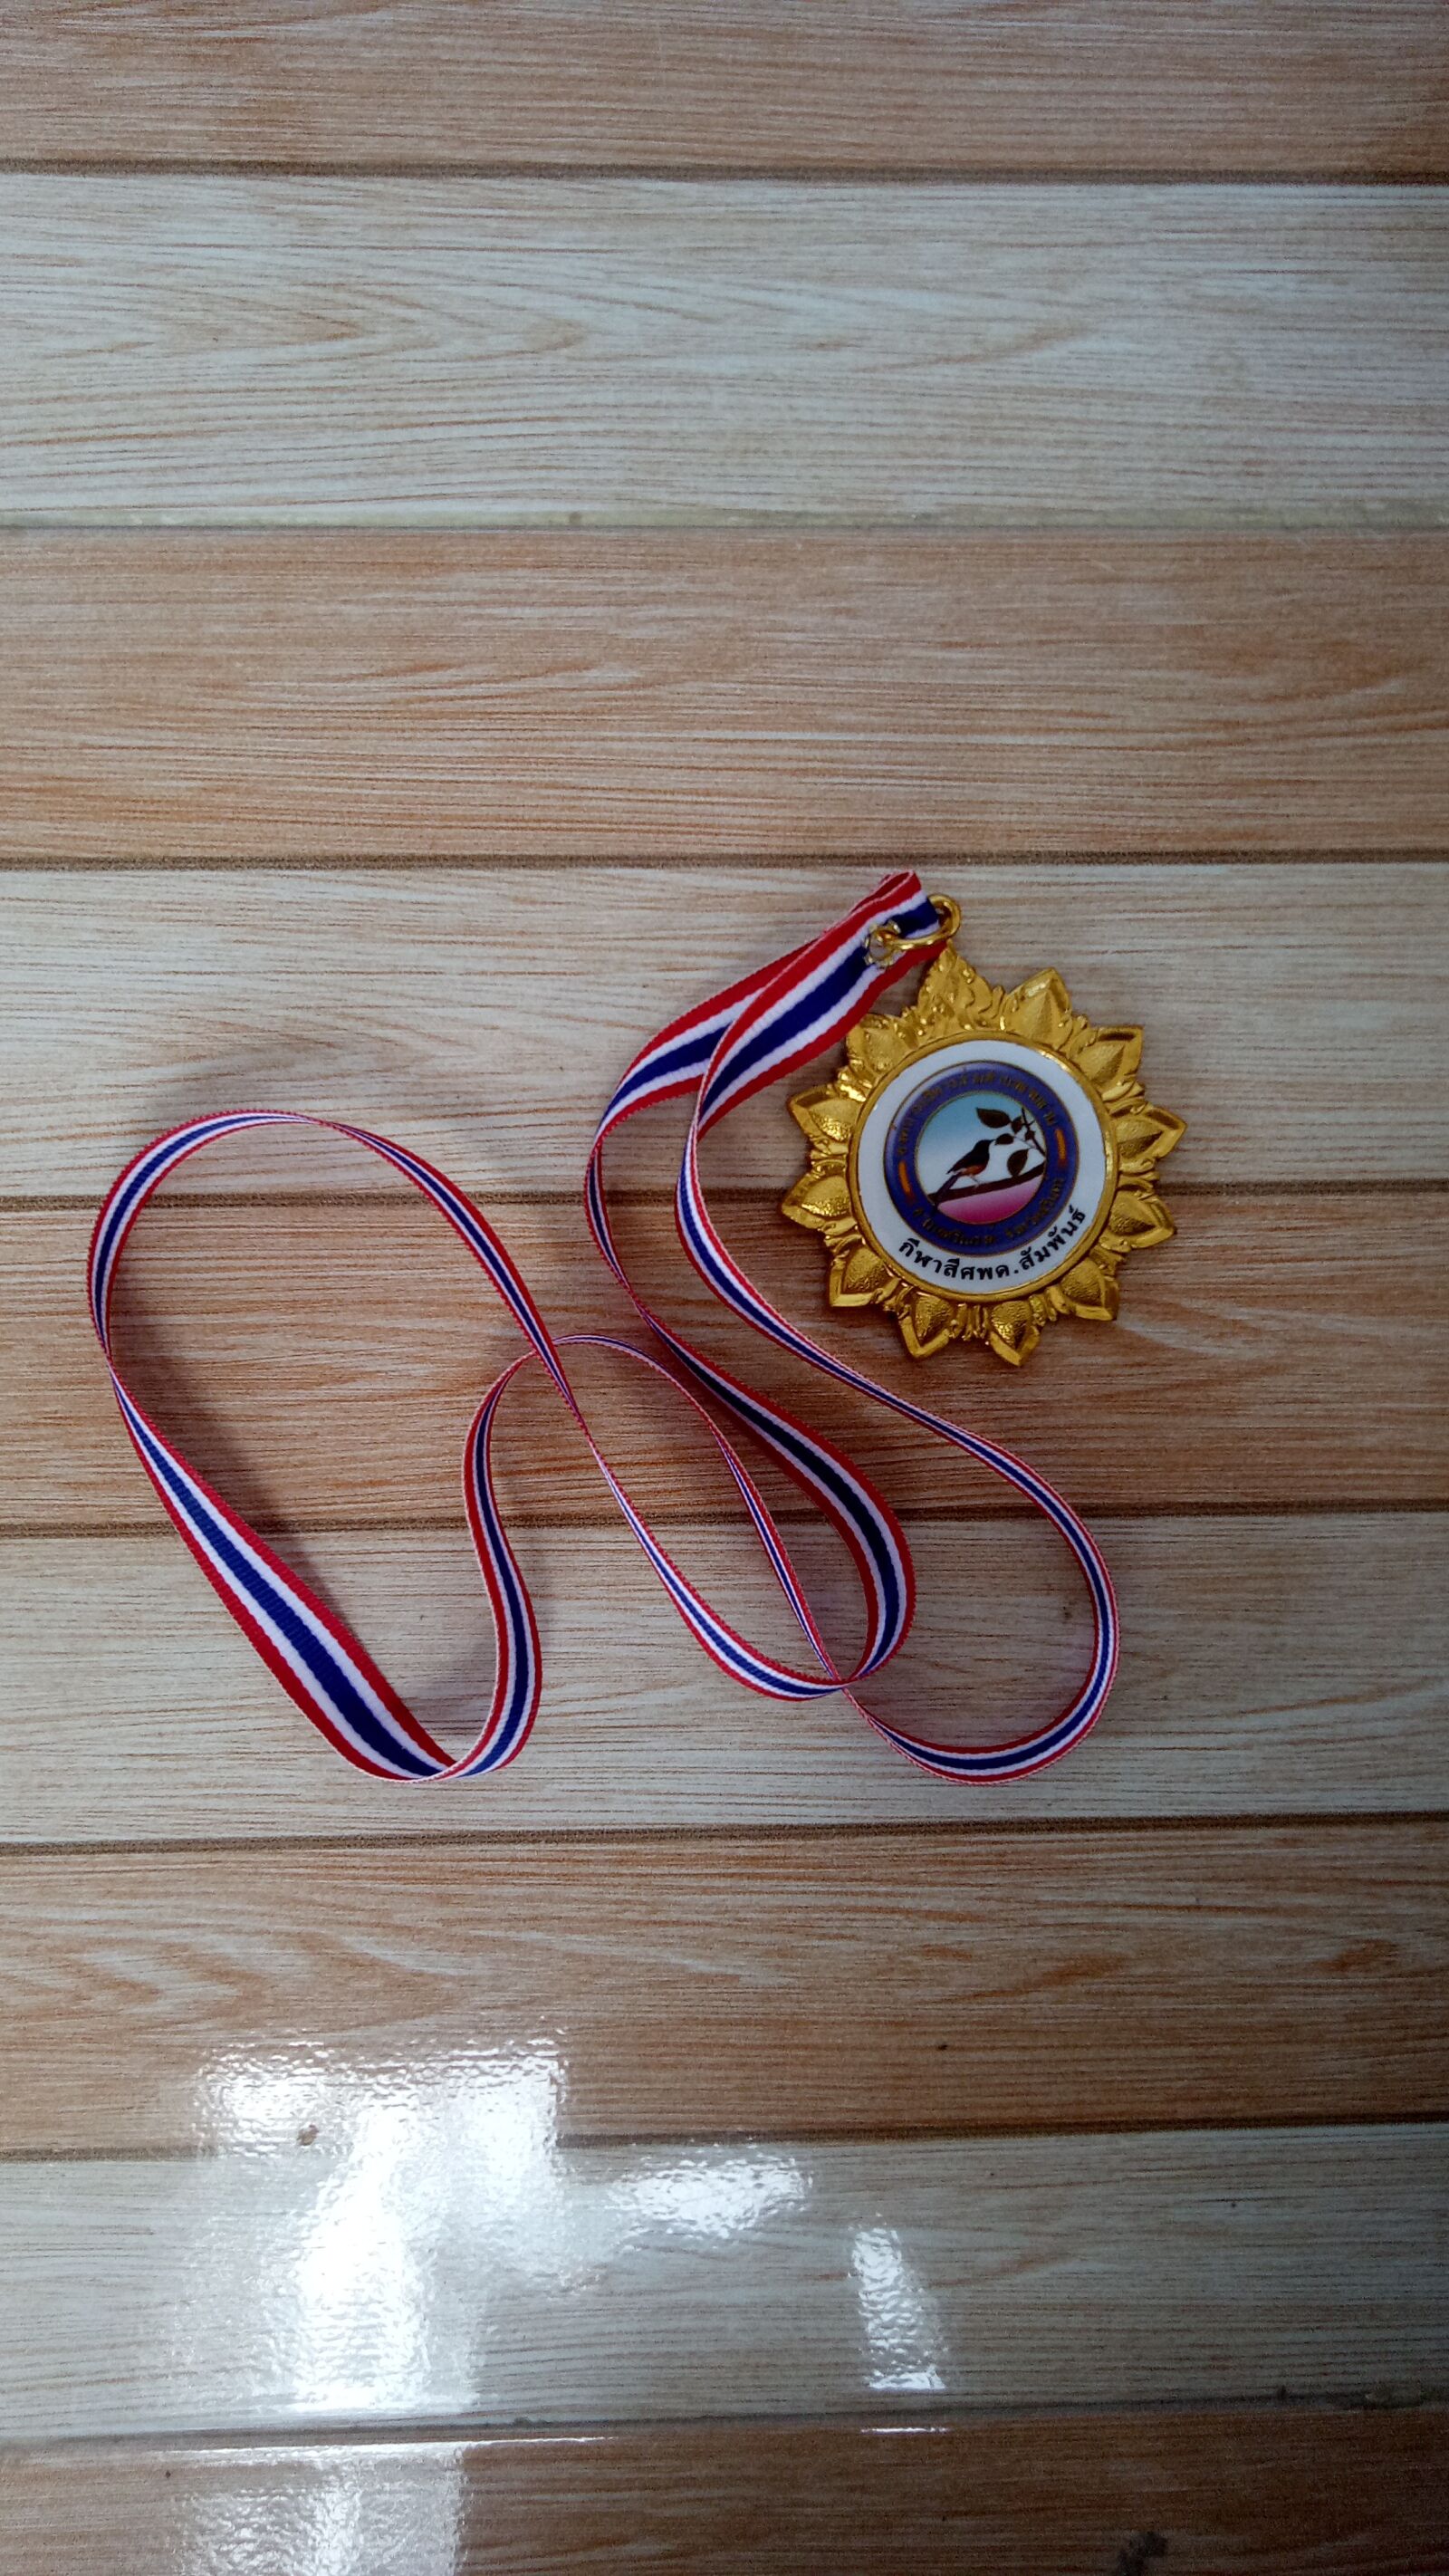 OPPO CPH1717 sample photo. Gold medal, sports, competitive photography